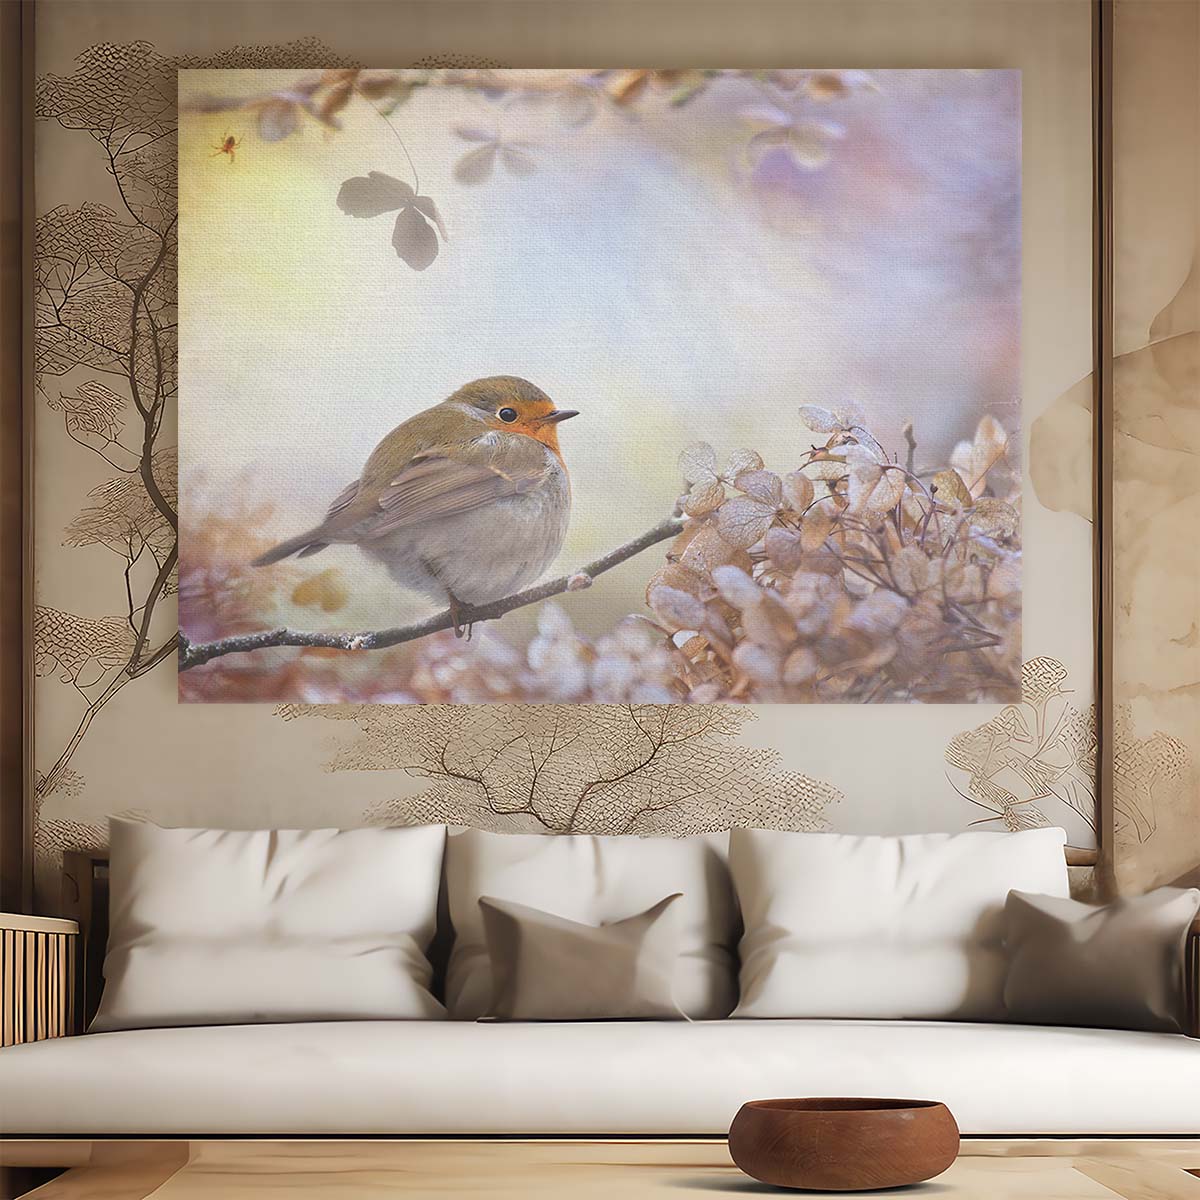 Enchanted Robin & Hydrangea Winter Dream Wall Art by Luxuriance Designs. Made in USA.